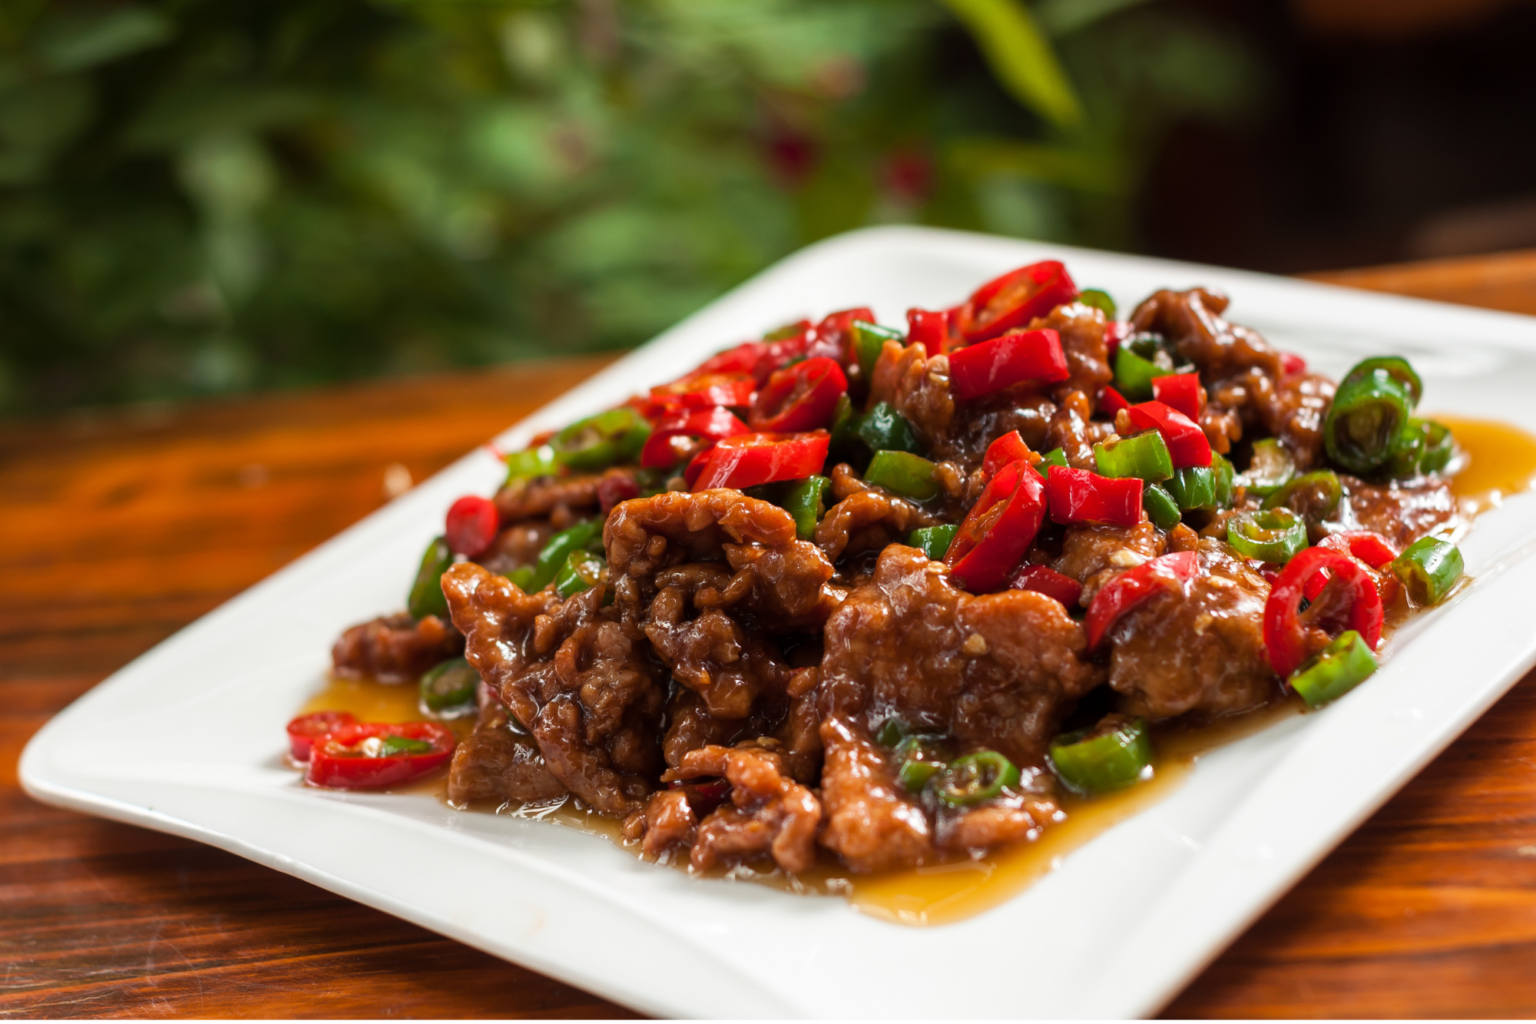 Sizzlin’ Spicy Szechuan and Beef Stir-Fry » Foodom